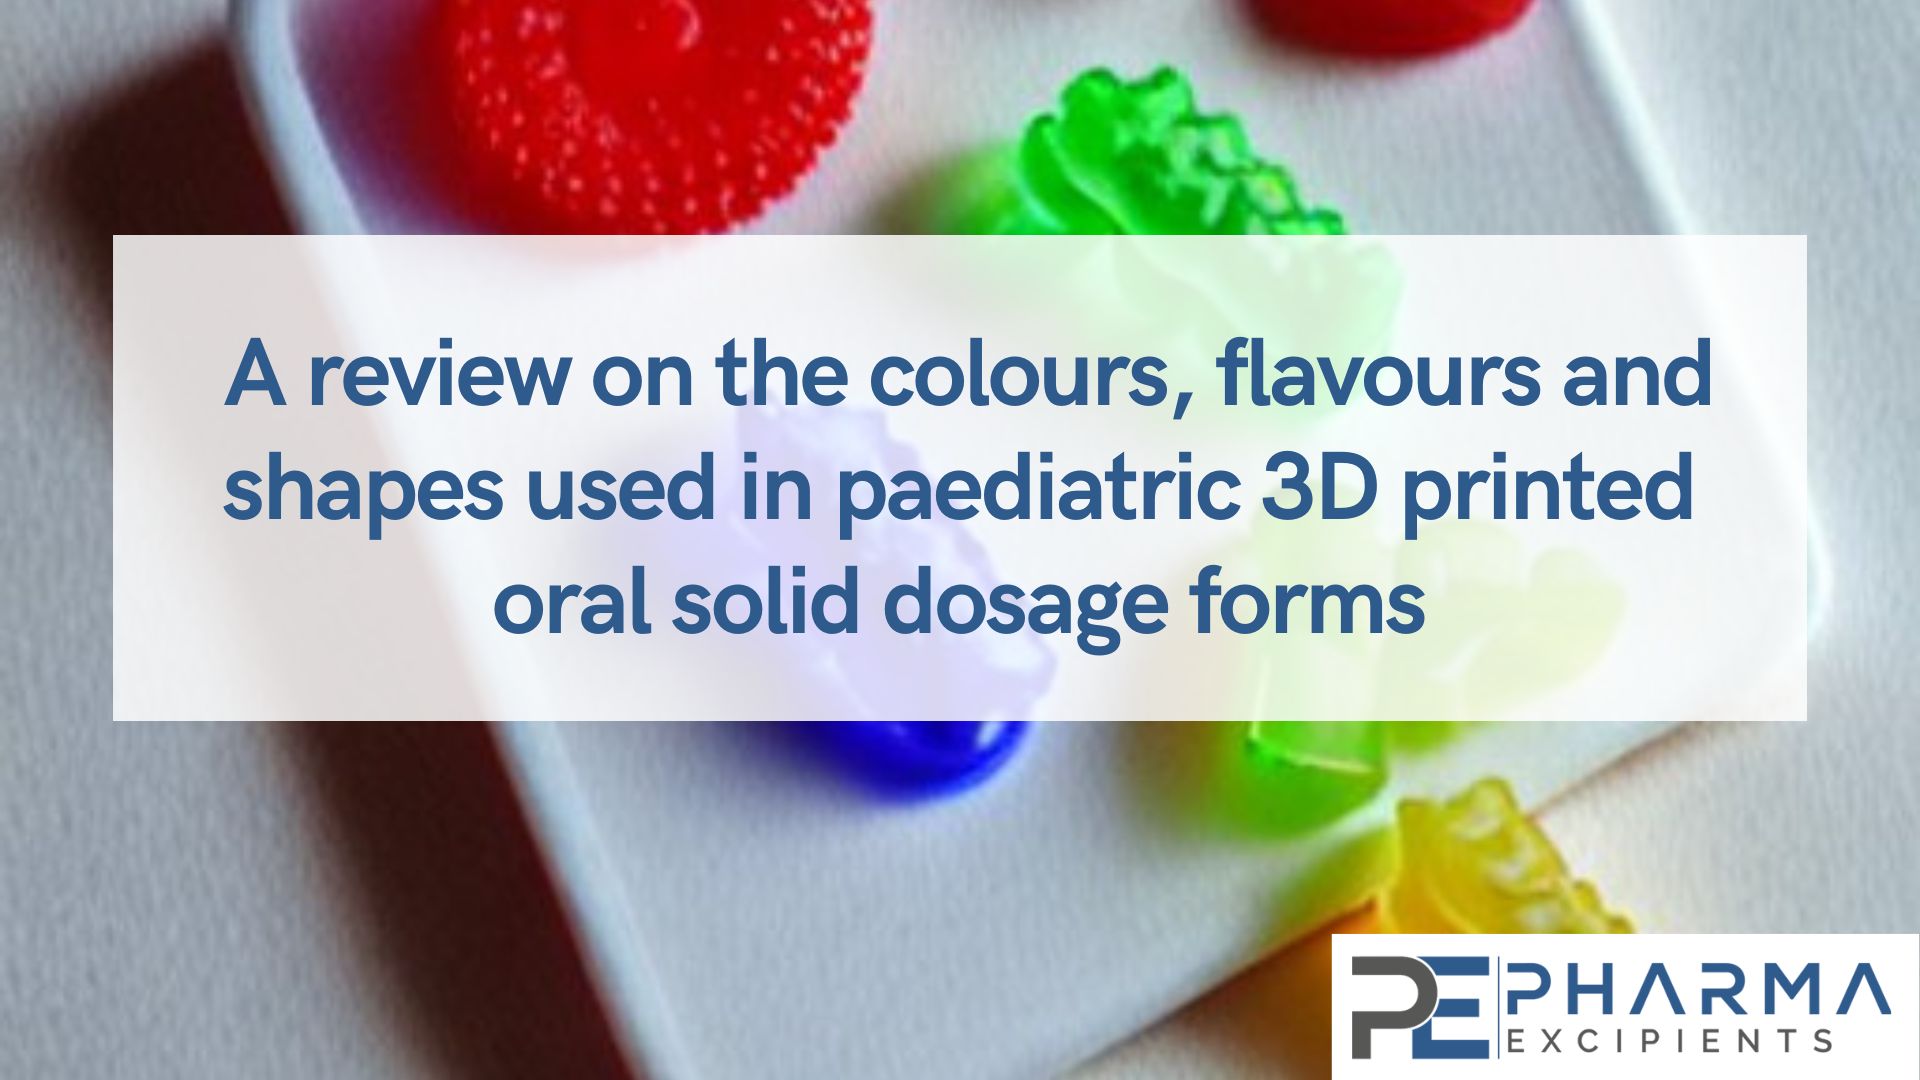 A review on the colours, flavours and shapes used in paediatric 3D printed oral solid dosage forms